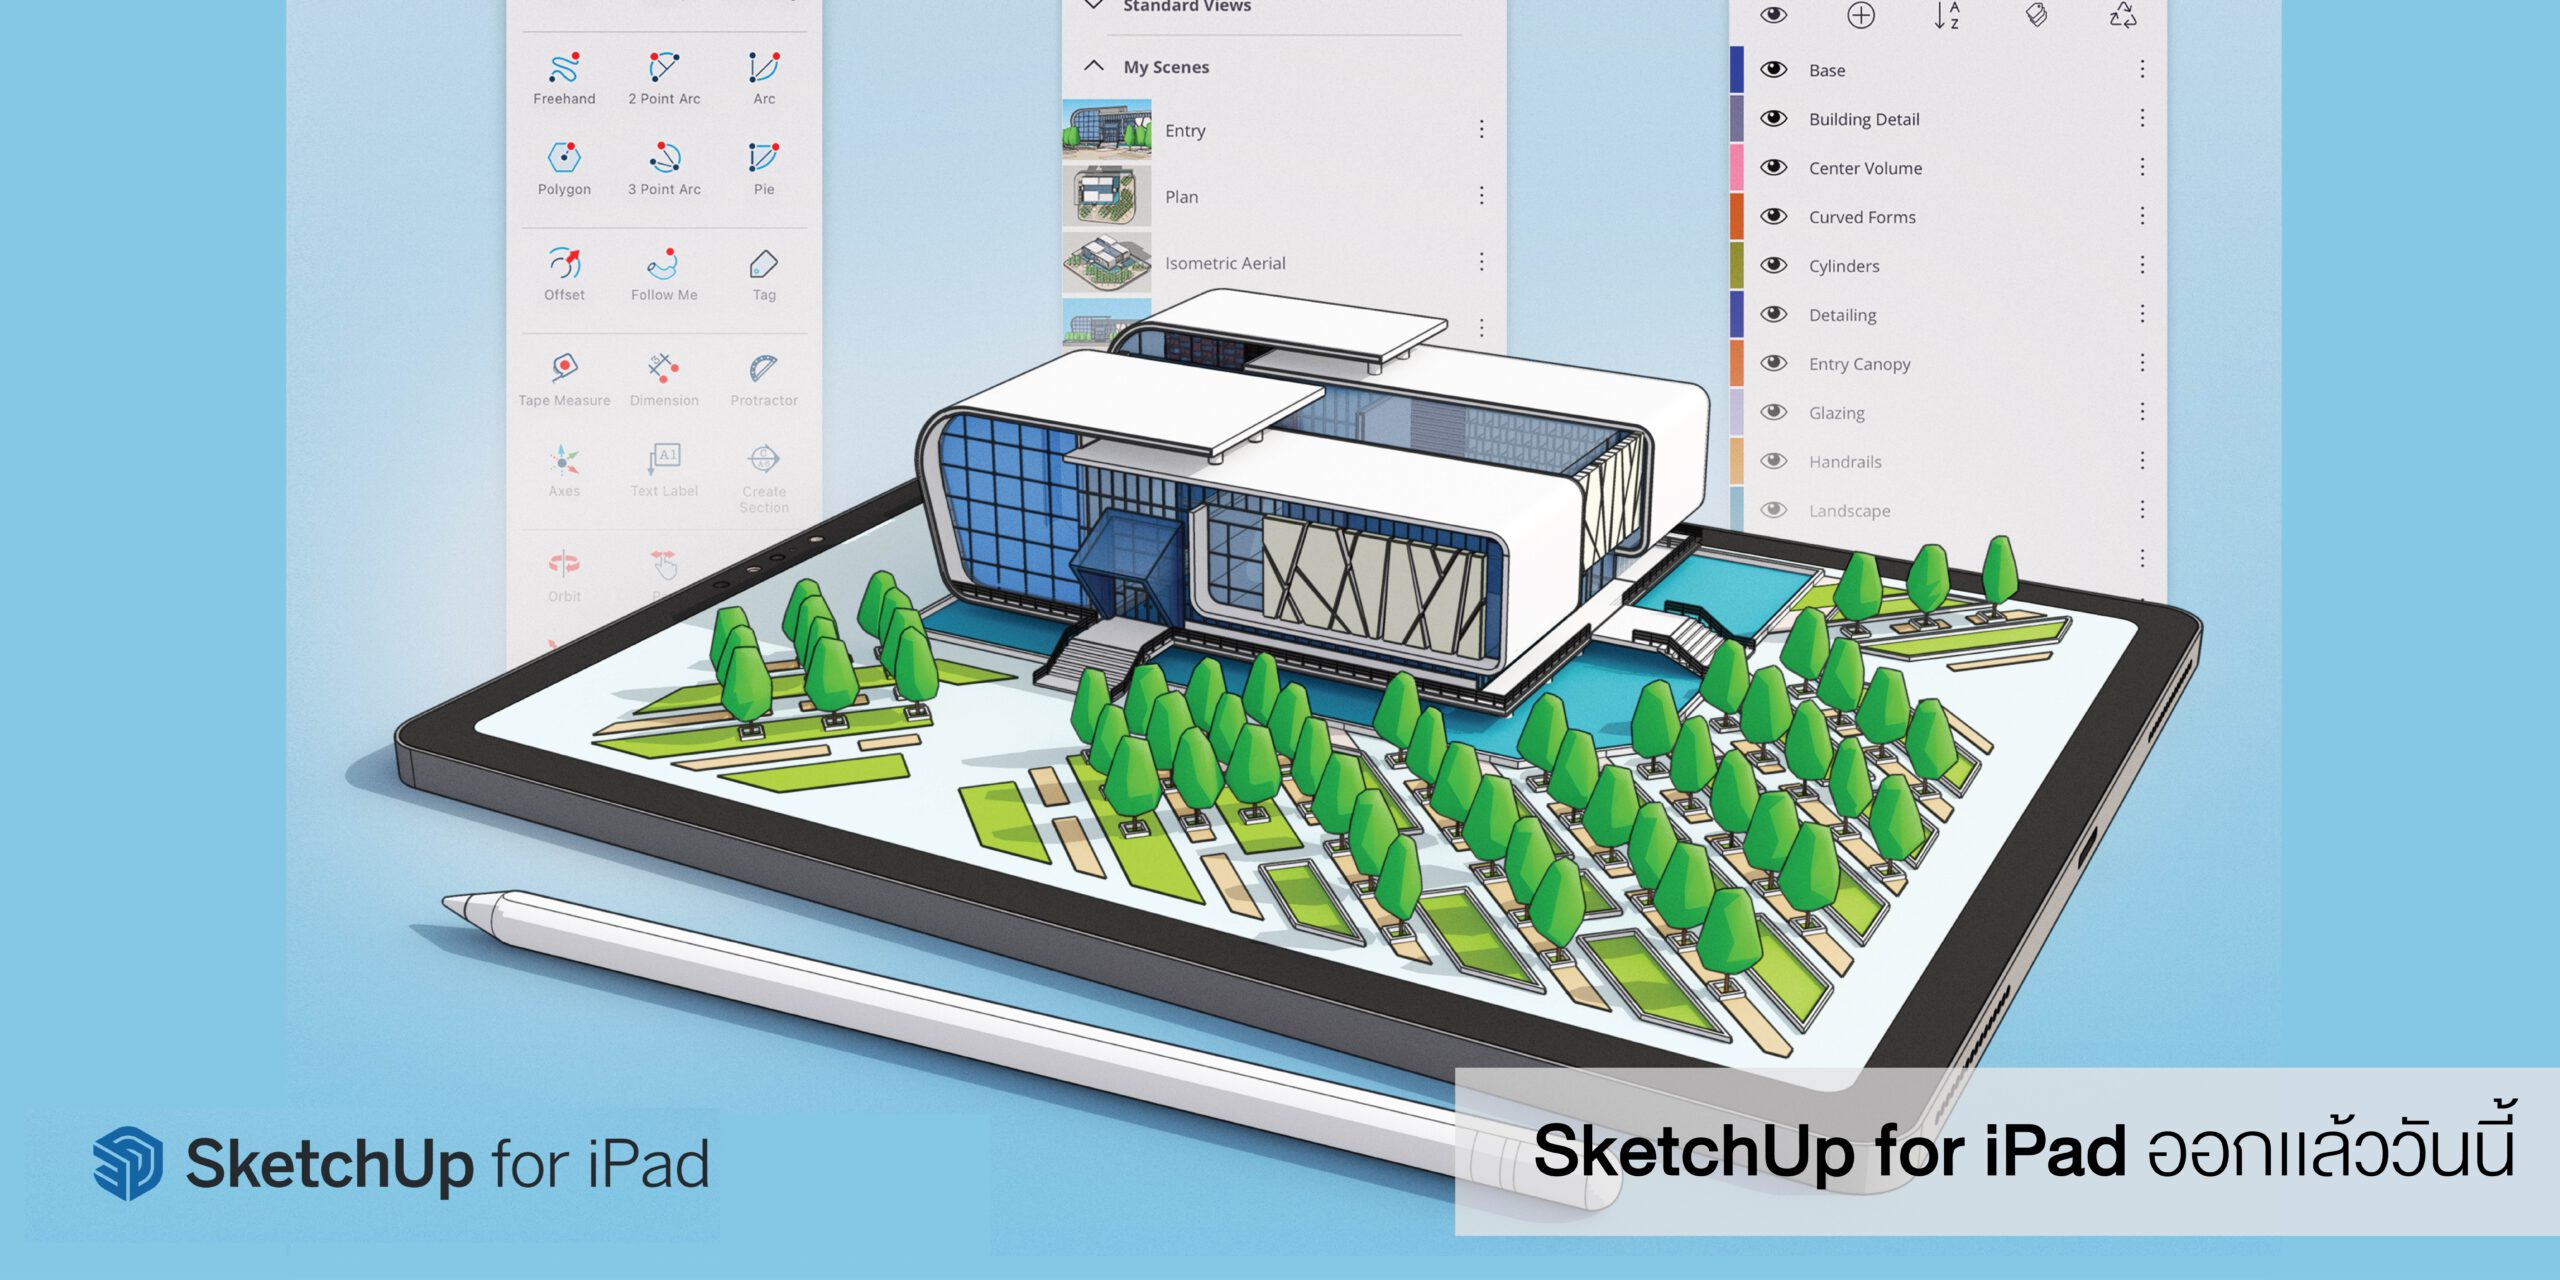 Sketchup pro 2021 student moonlight download pc